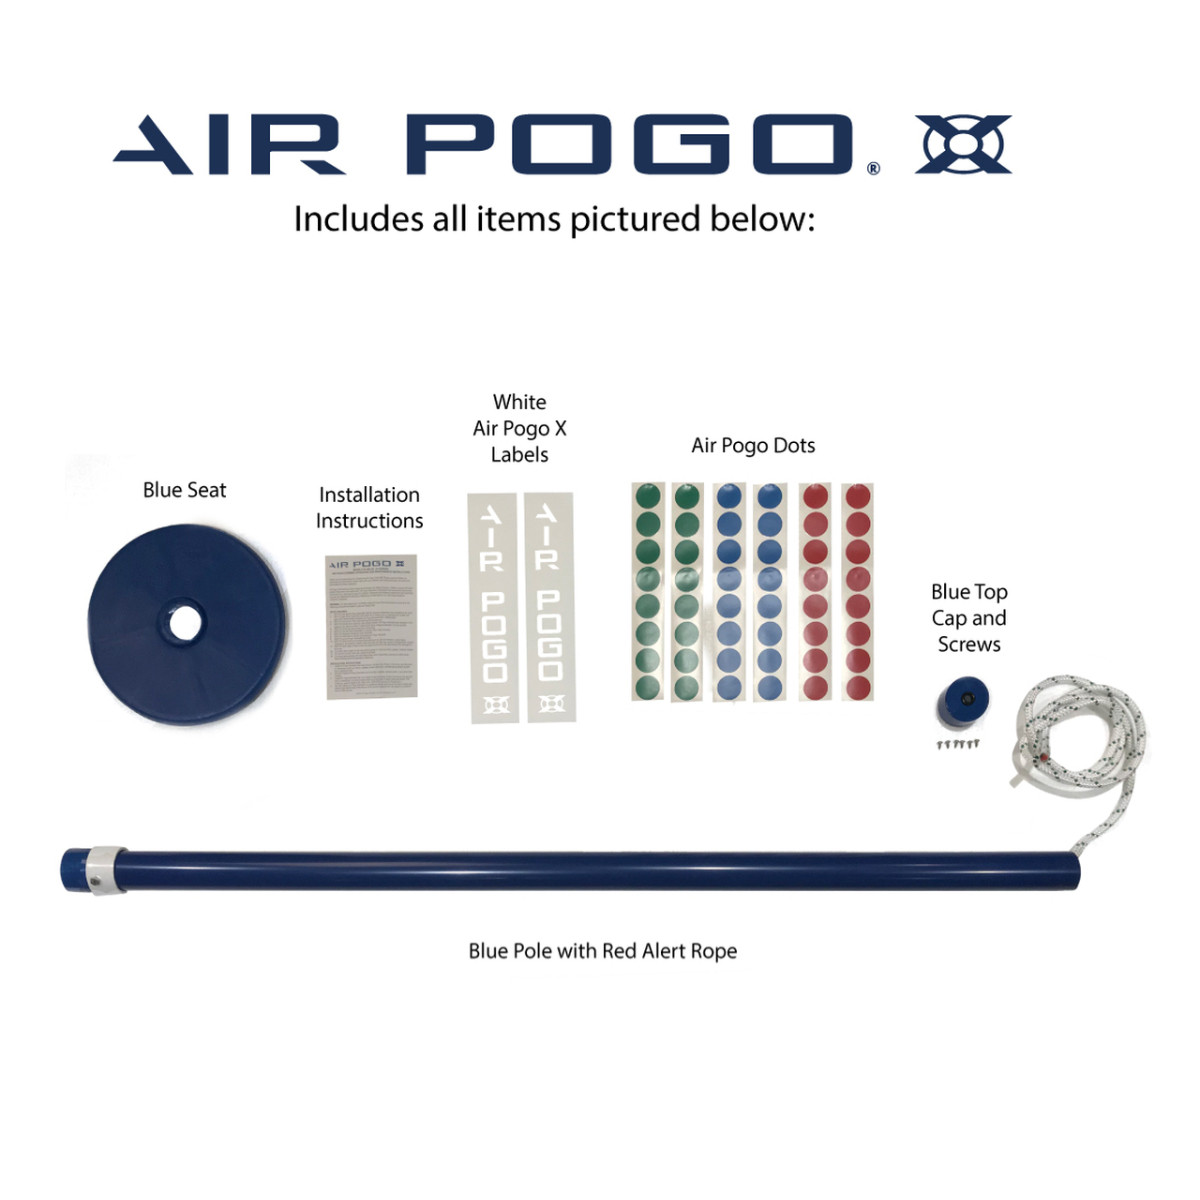 Air Pogo Xtreme Swing - Kit Contents